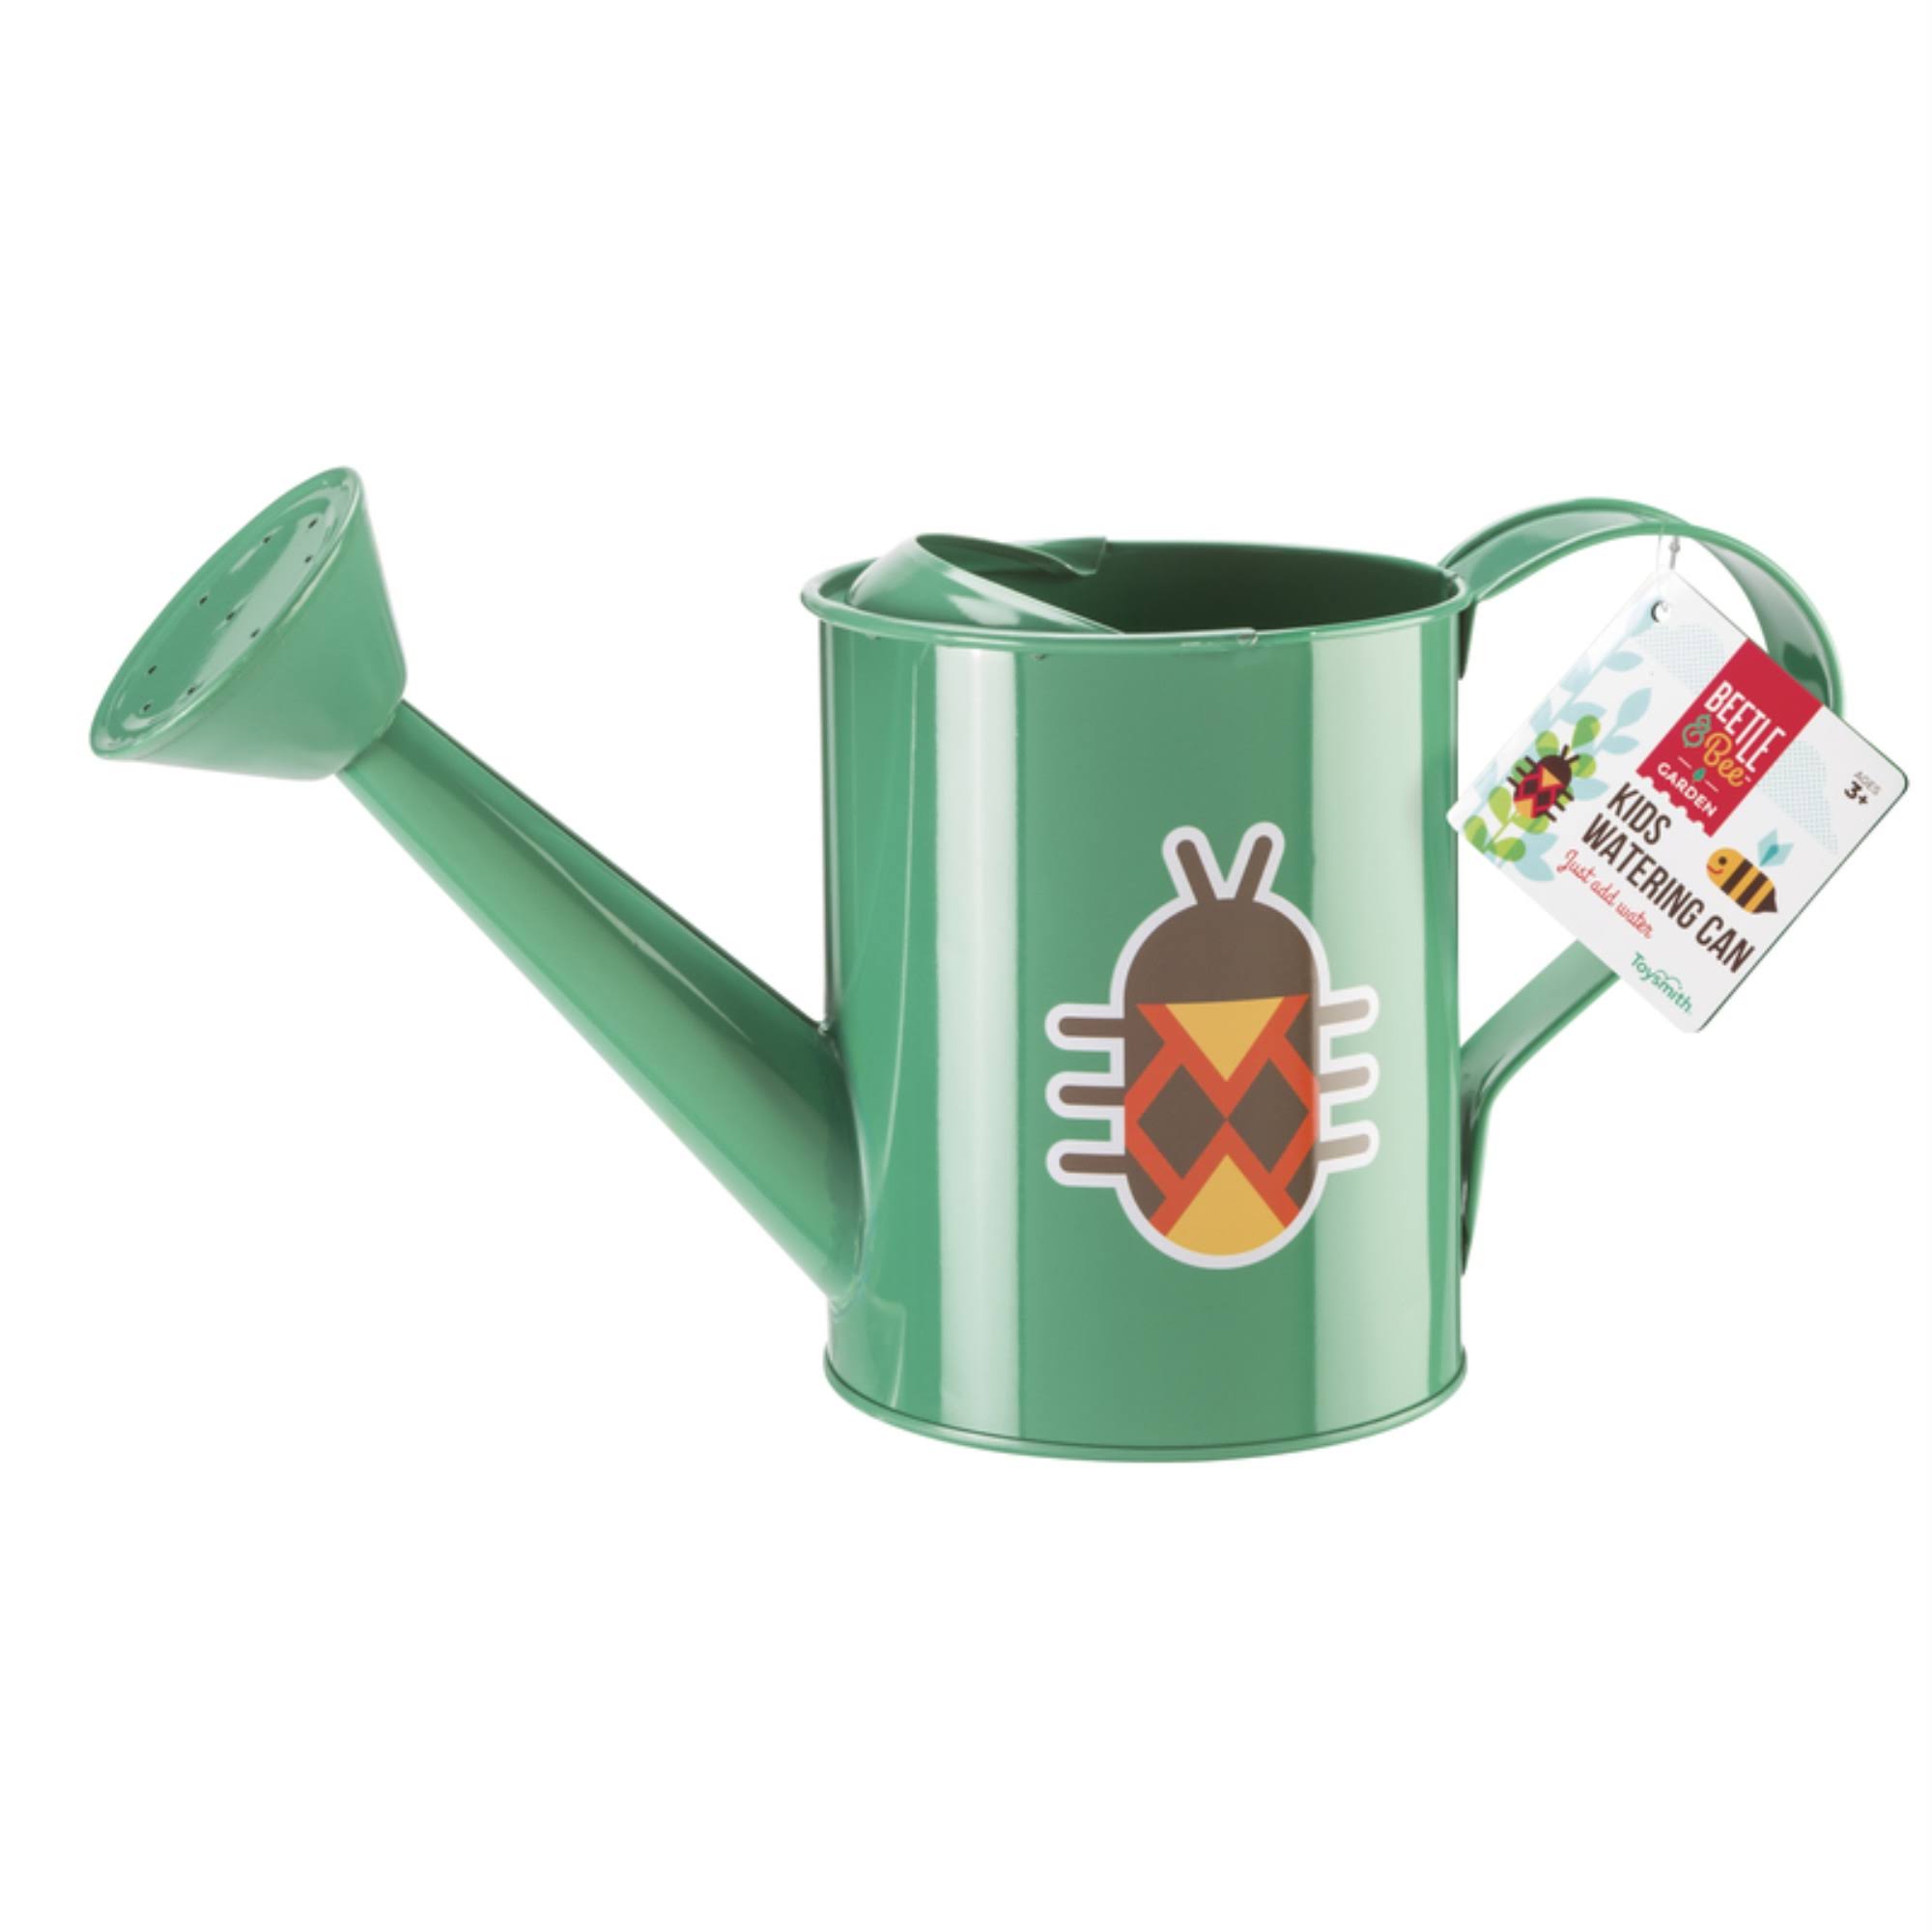 Toysmith Metal Watering Can